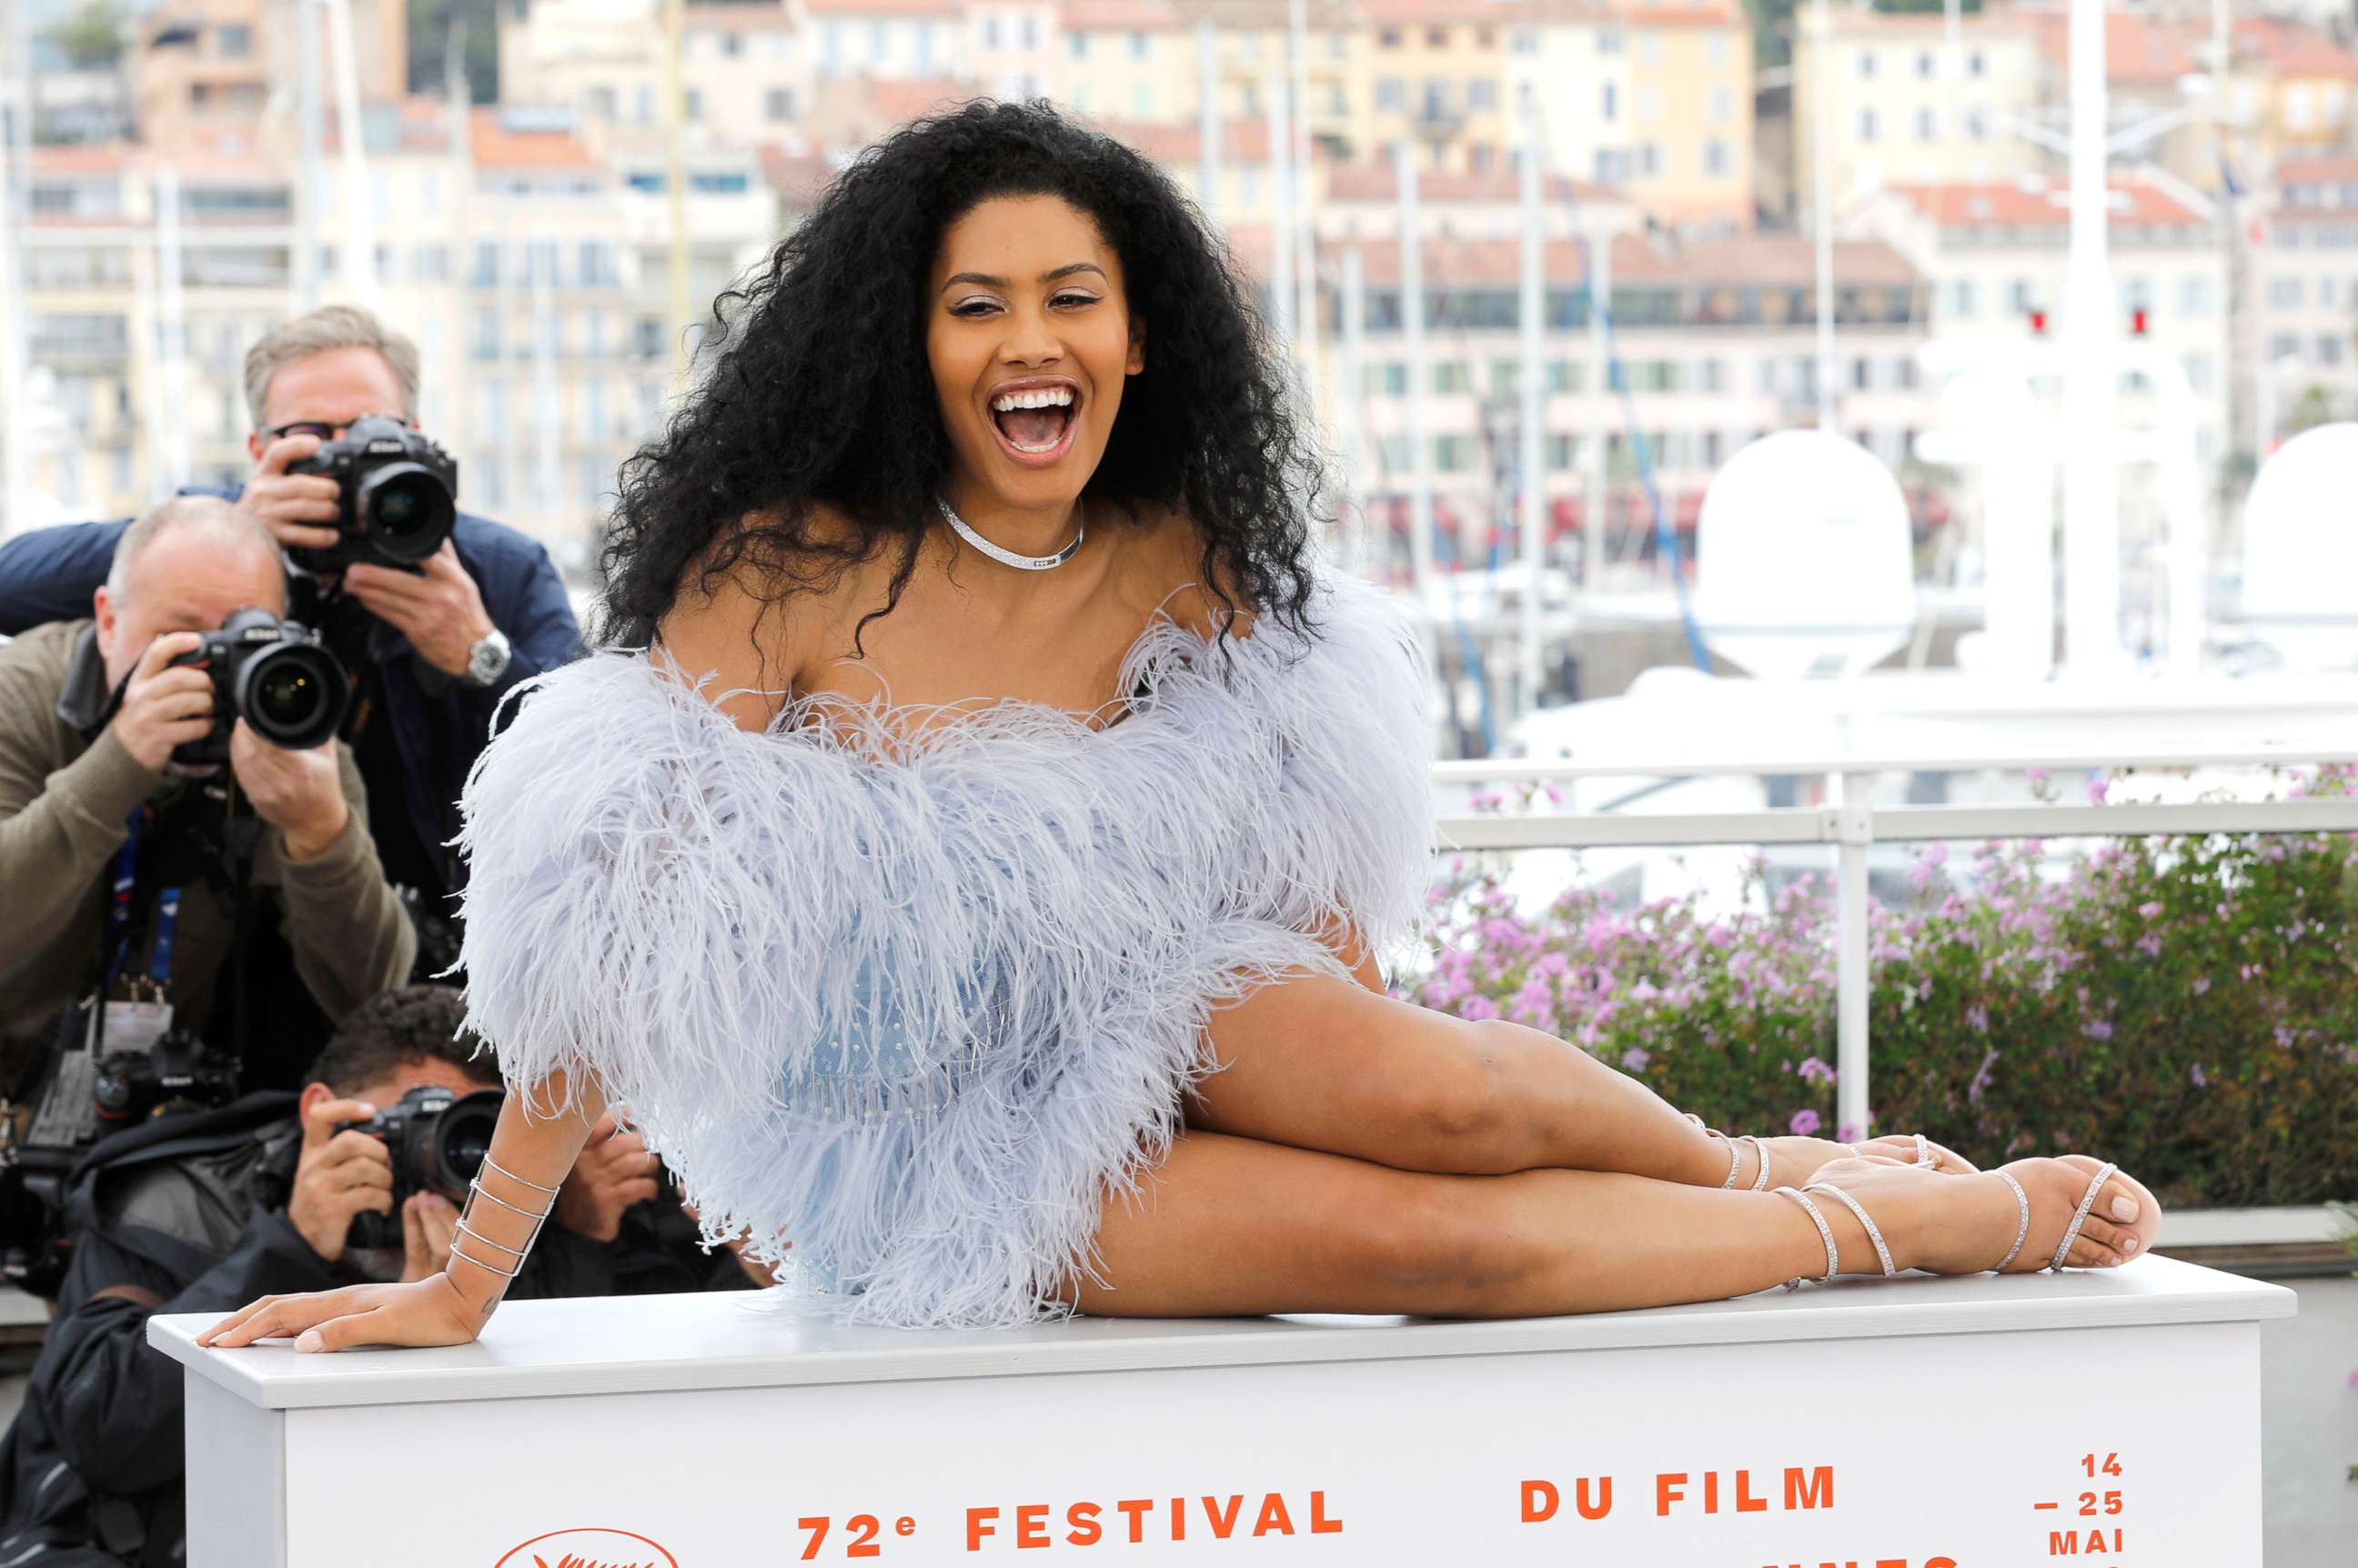 PHOTO: Leyna Bloom poses for photographers during the 72nd Cannes Film Festival on May 19, 2019 in Cannes, France.